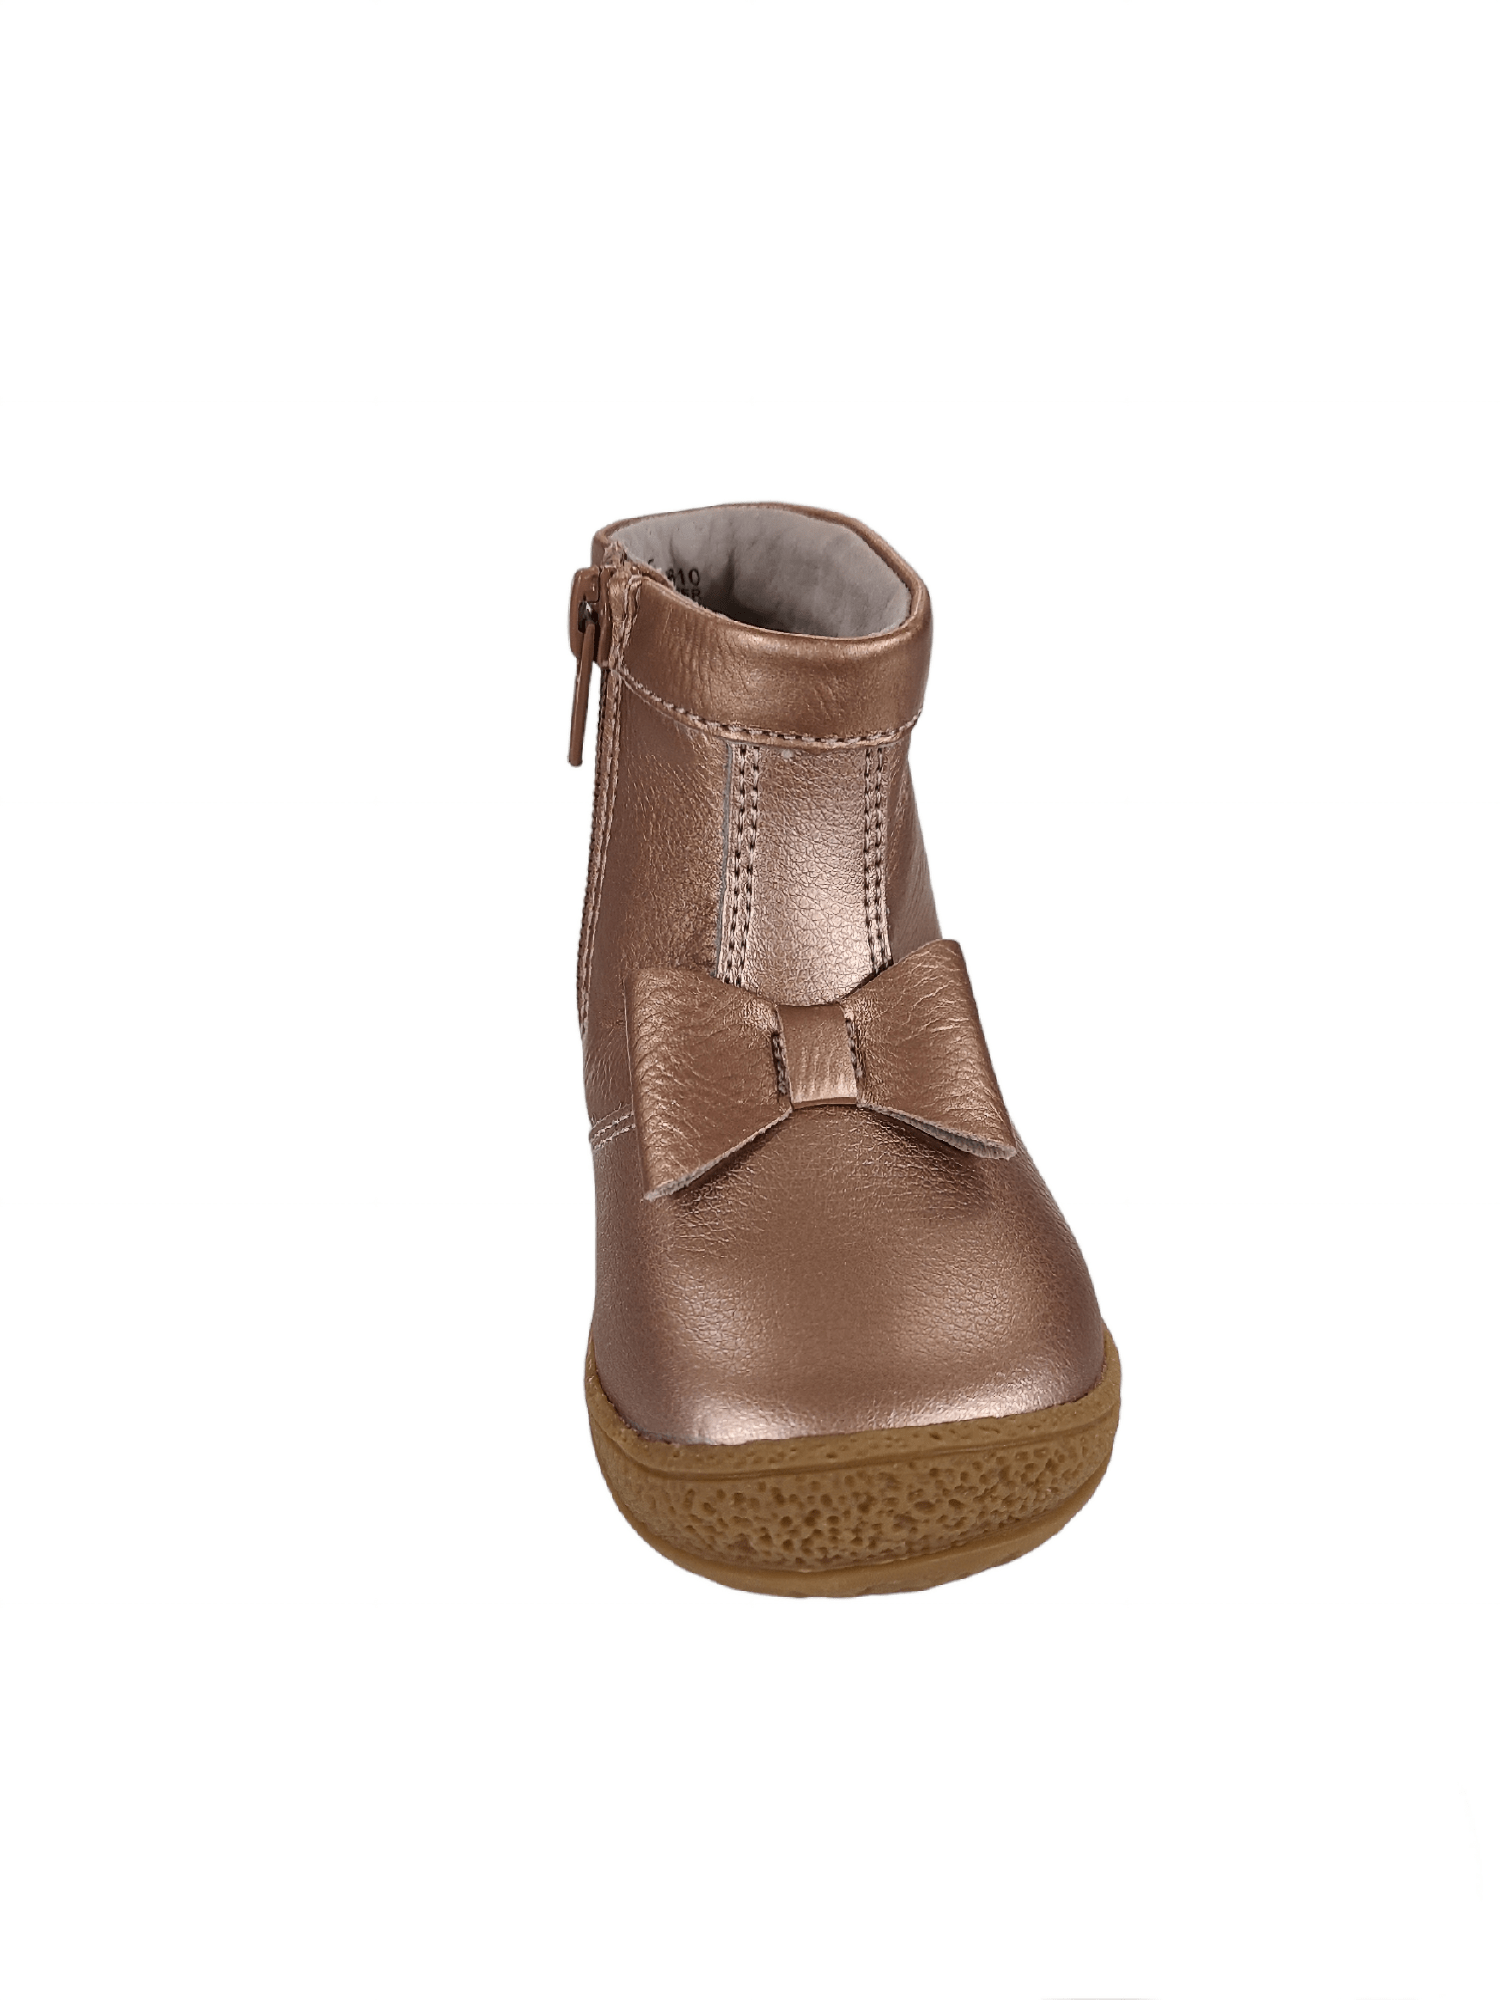 L'Amour Shoes L'Amour Girls Hilary Bow Boot - Little Miss Muffin Children & Home